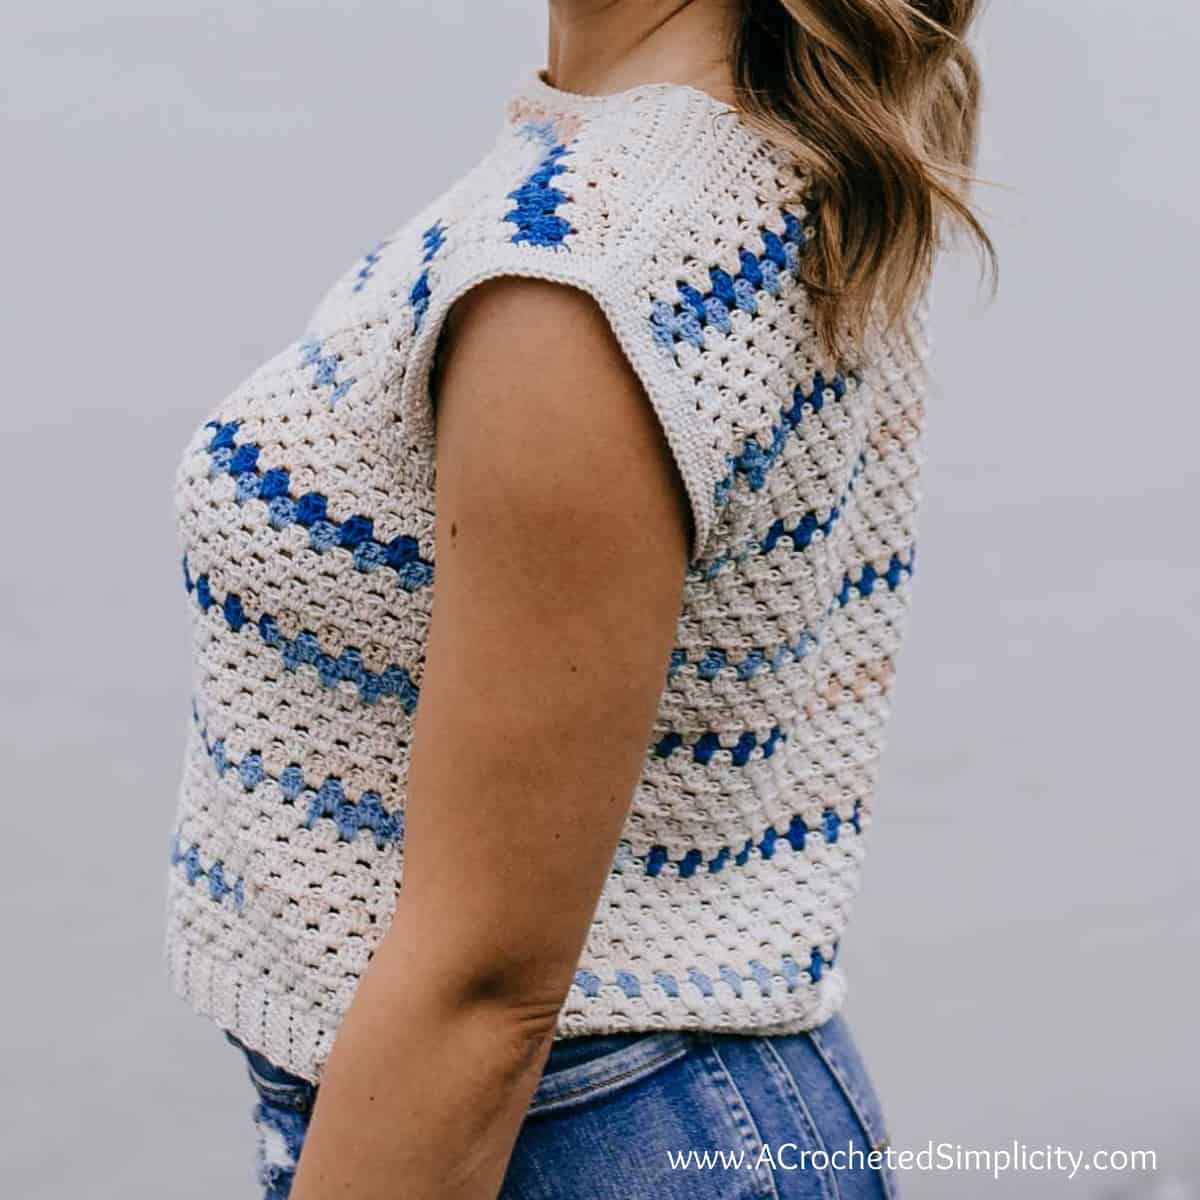 Close up of a woman on a beach modeling a boho inspired crochet blouse.